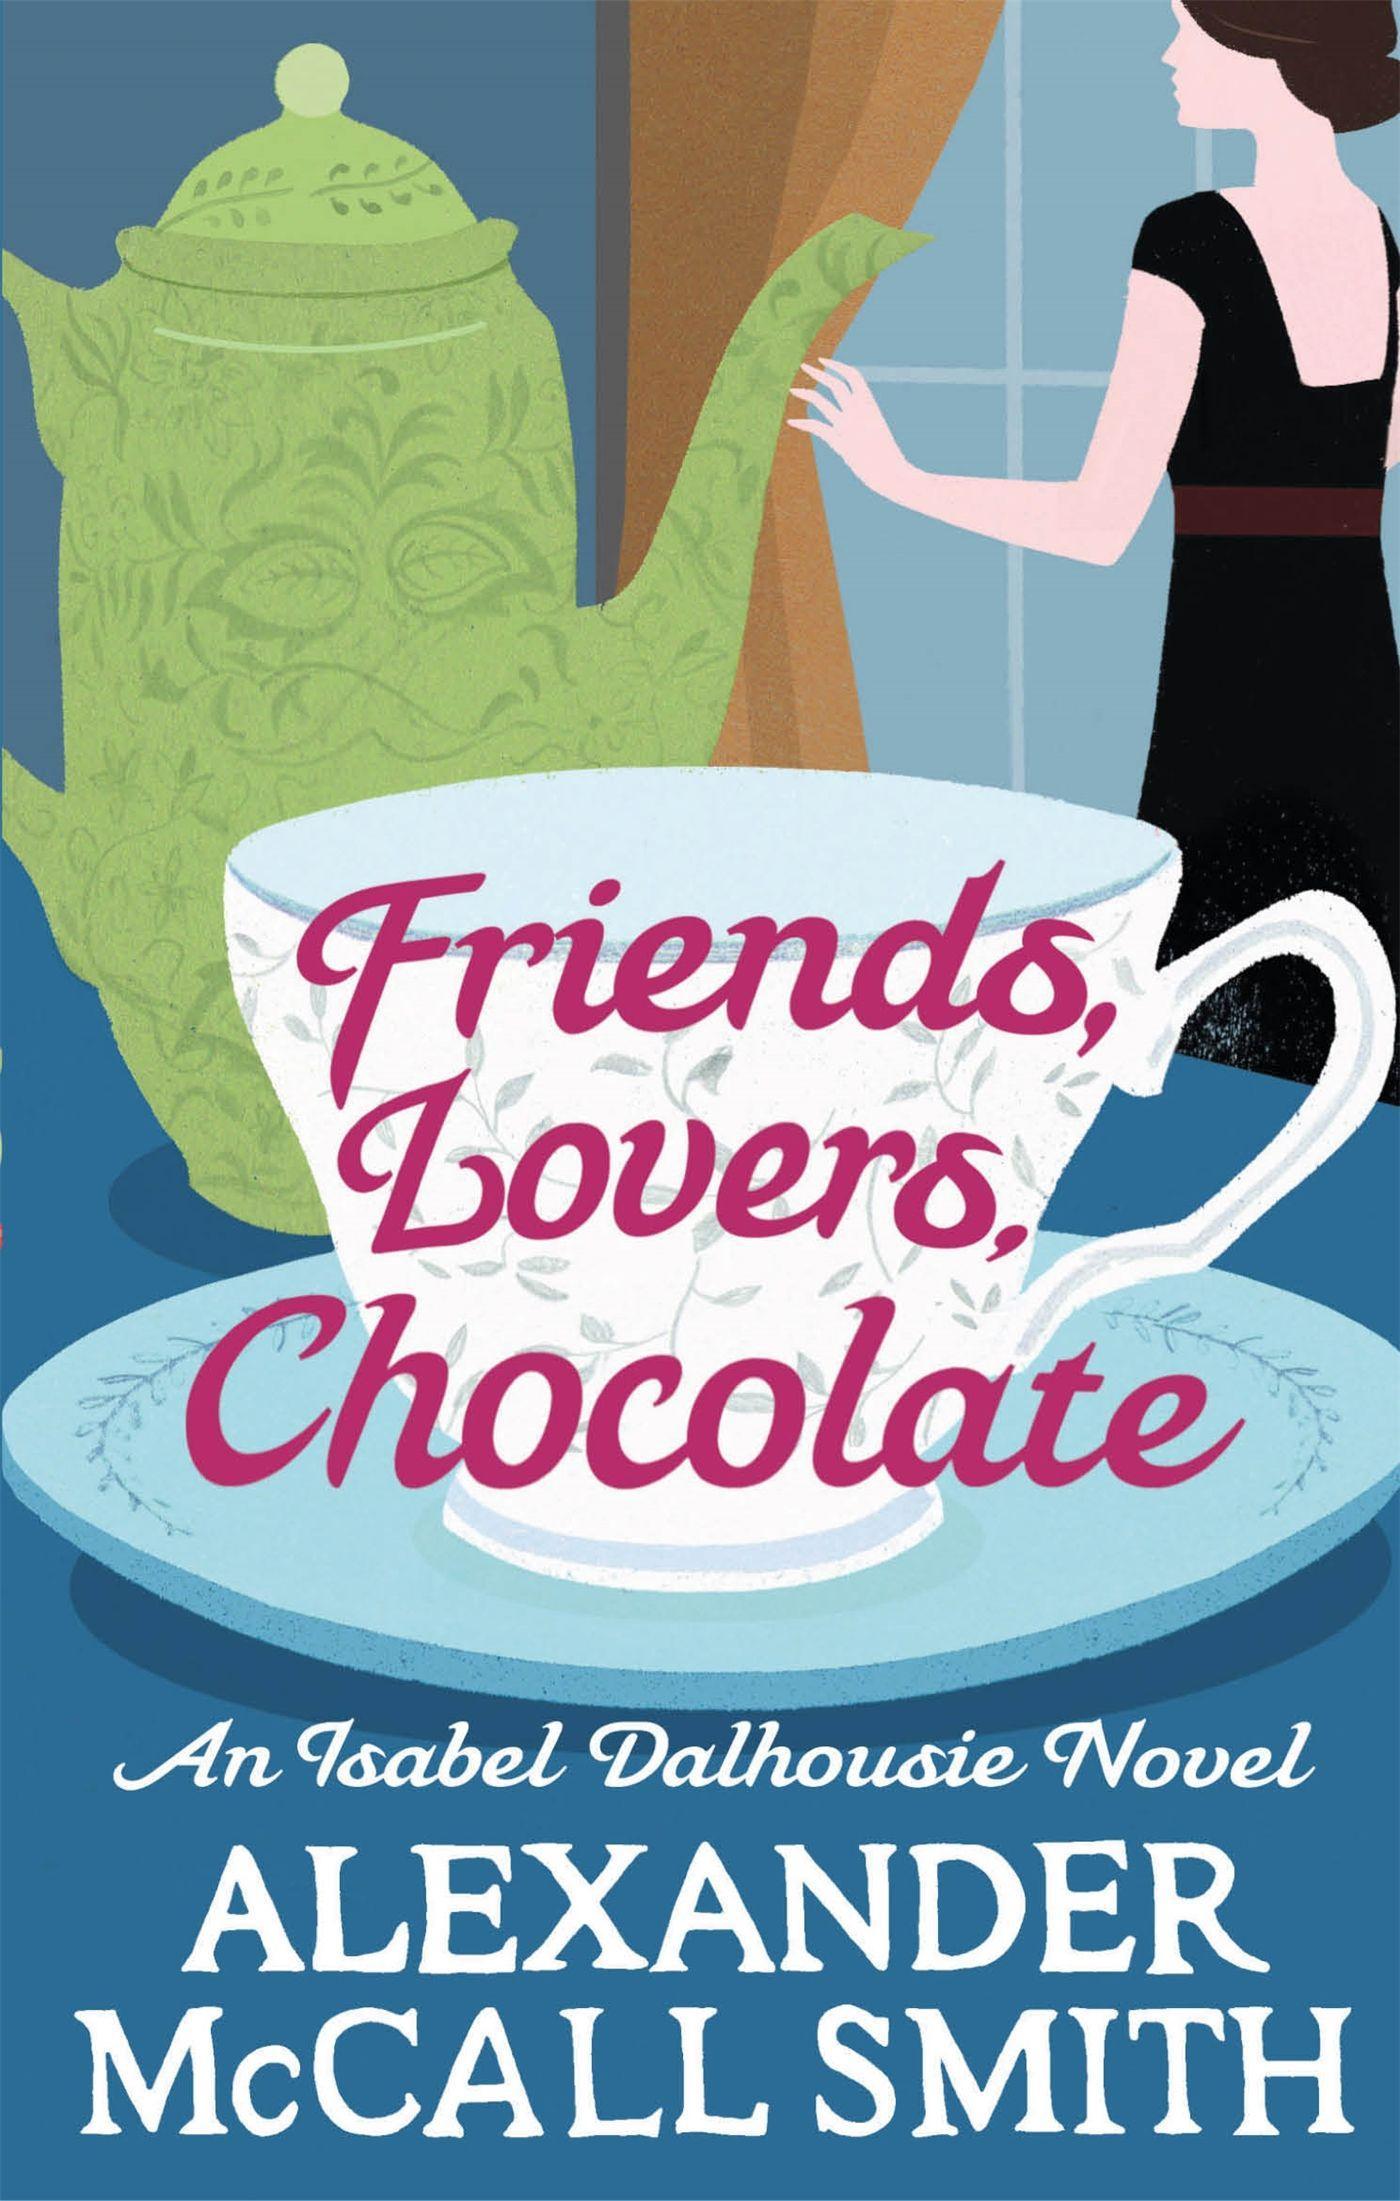 Friends, Lovers, Chocolate - Smith, Alexander McCall